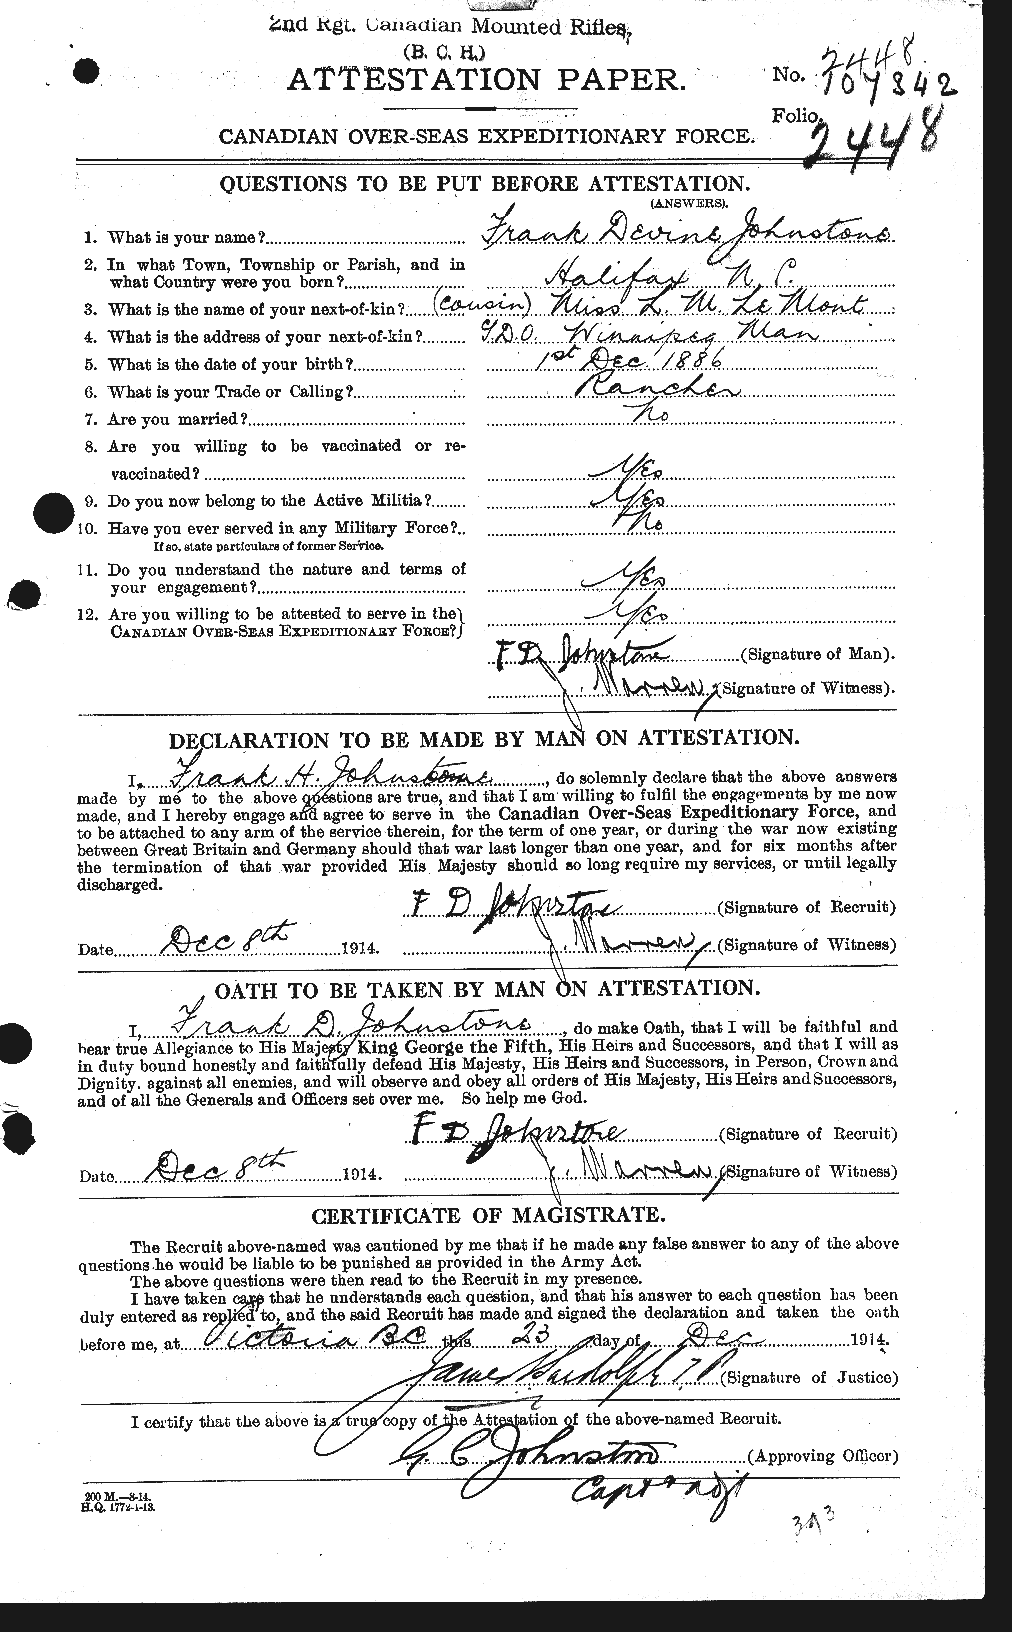 Personnel Records of the First World War - CEF 419615a